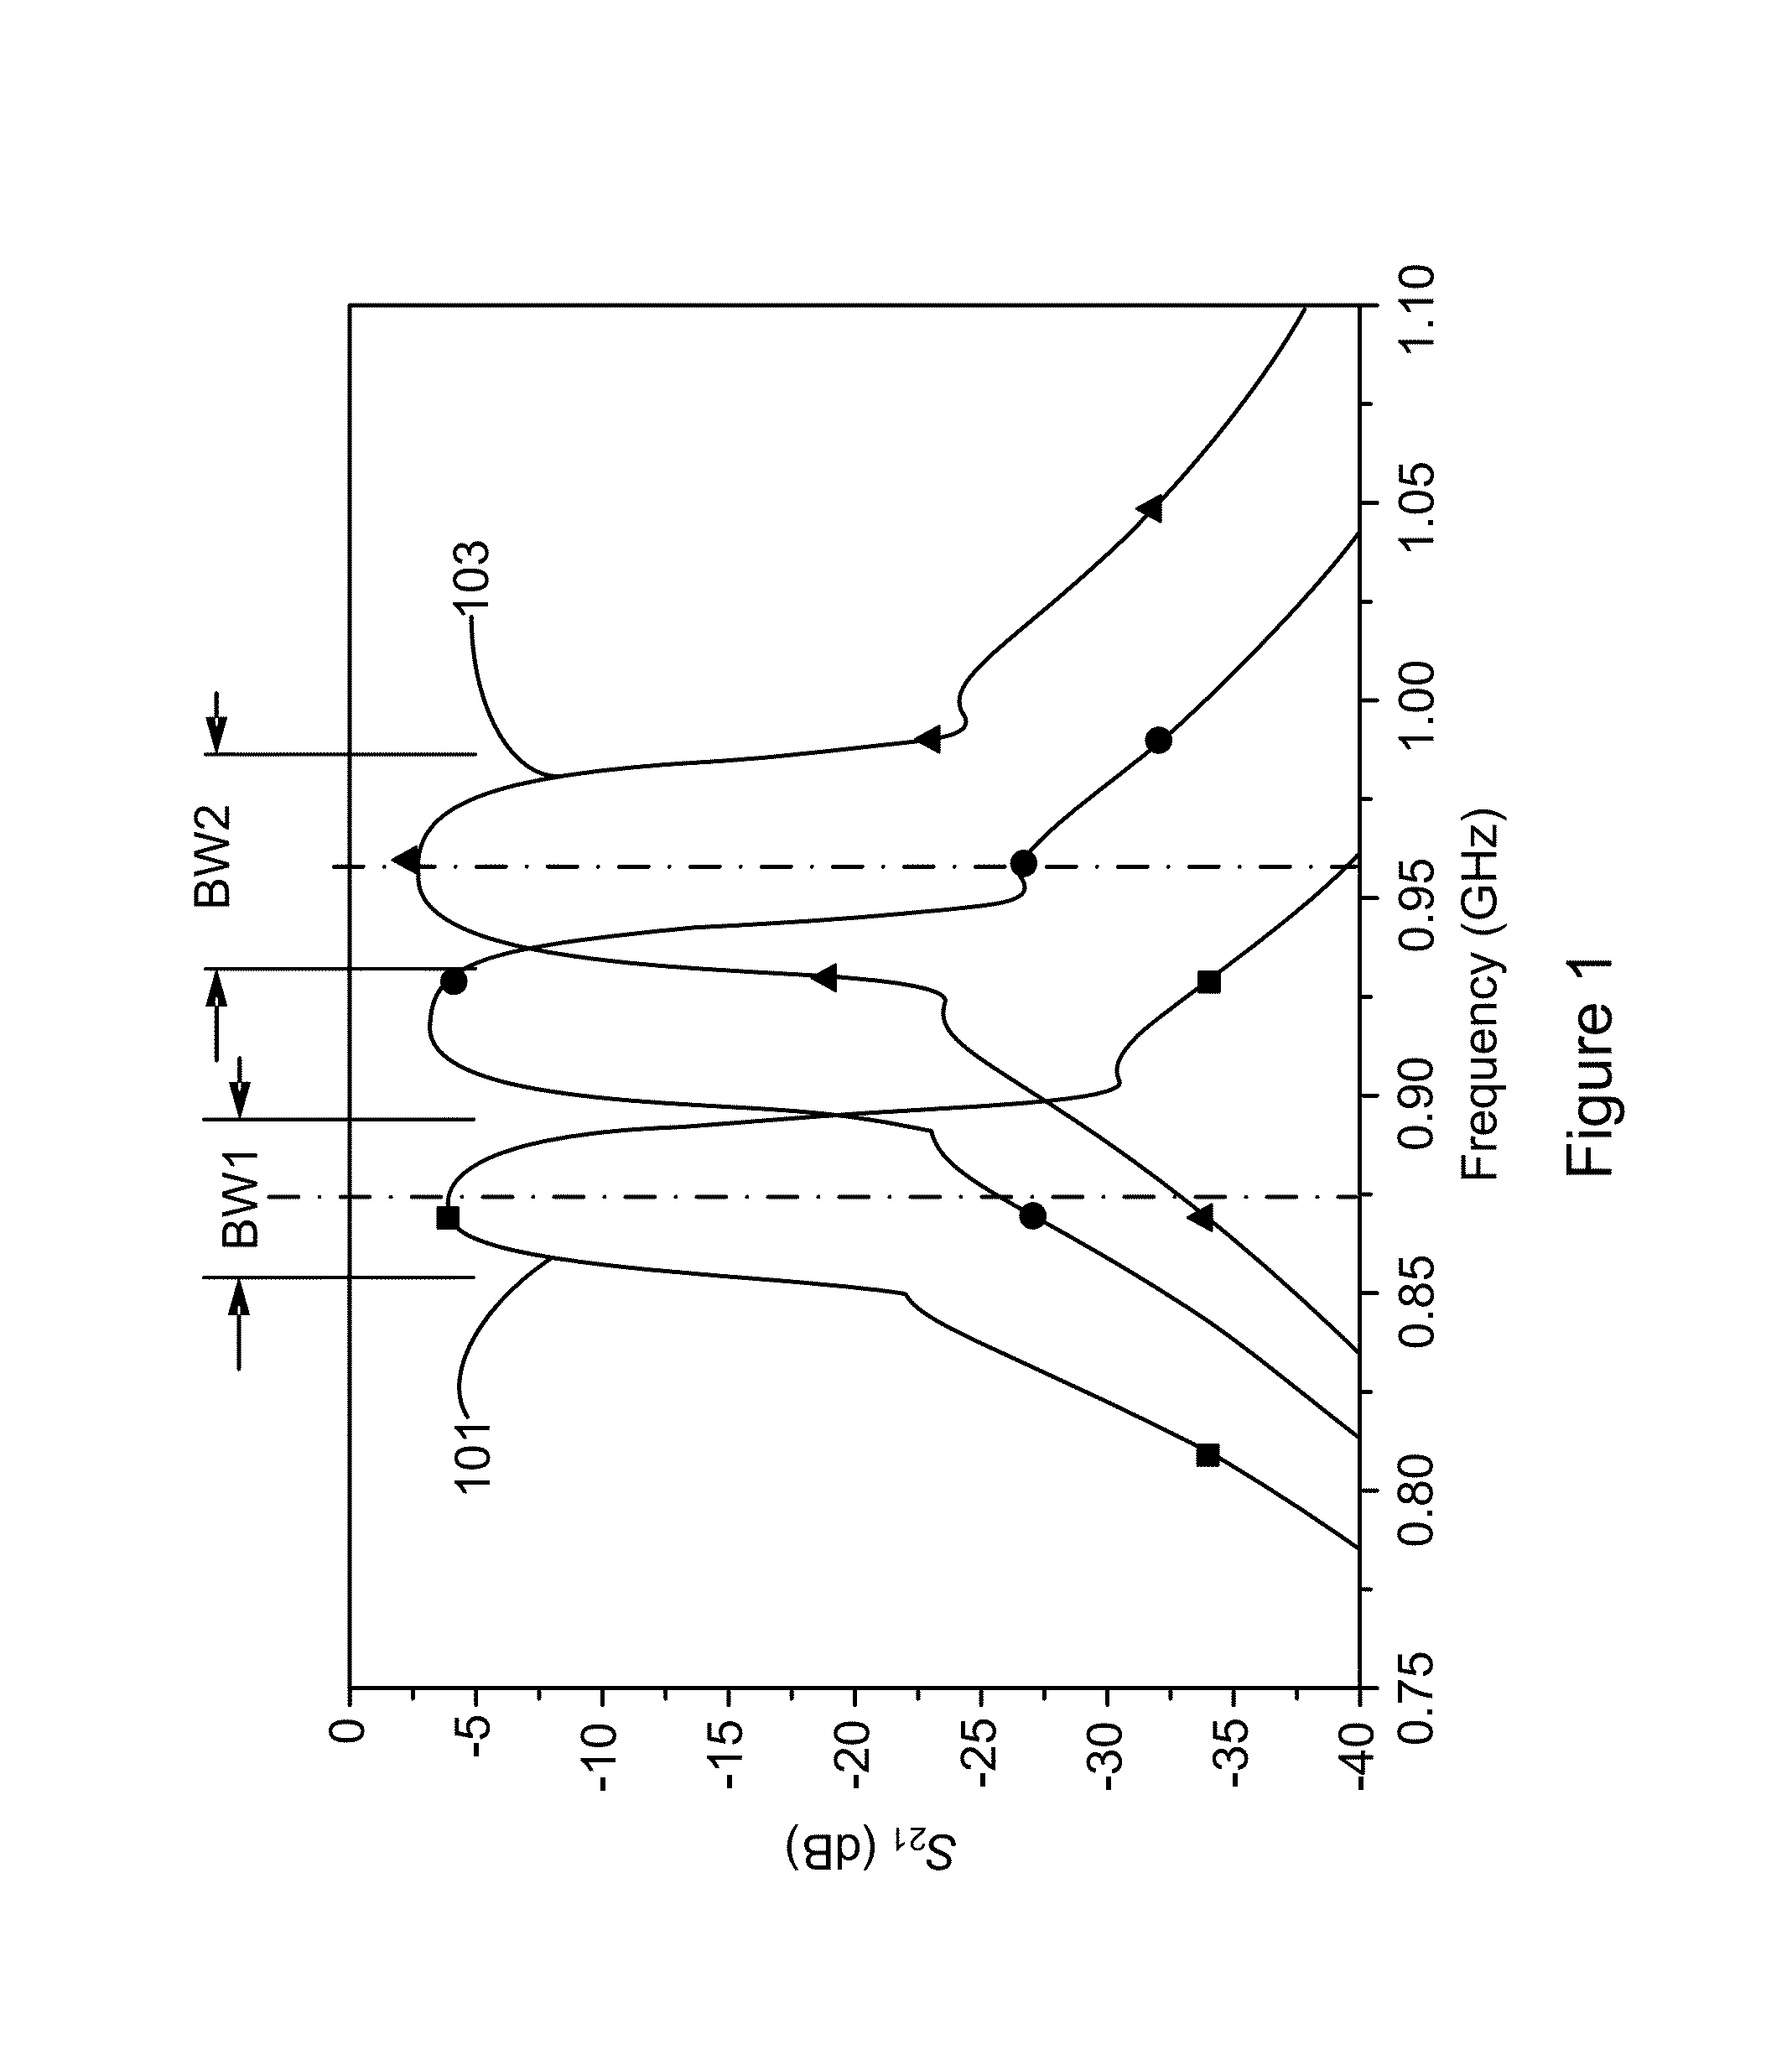 Frequency and bandwidth tunable microwave filter